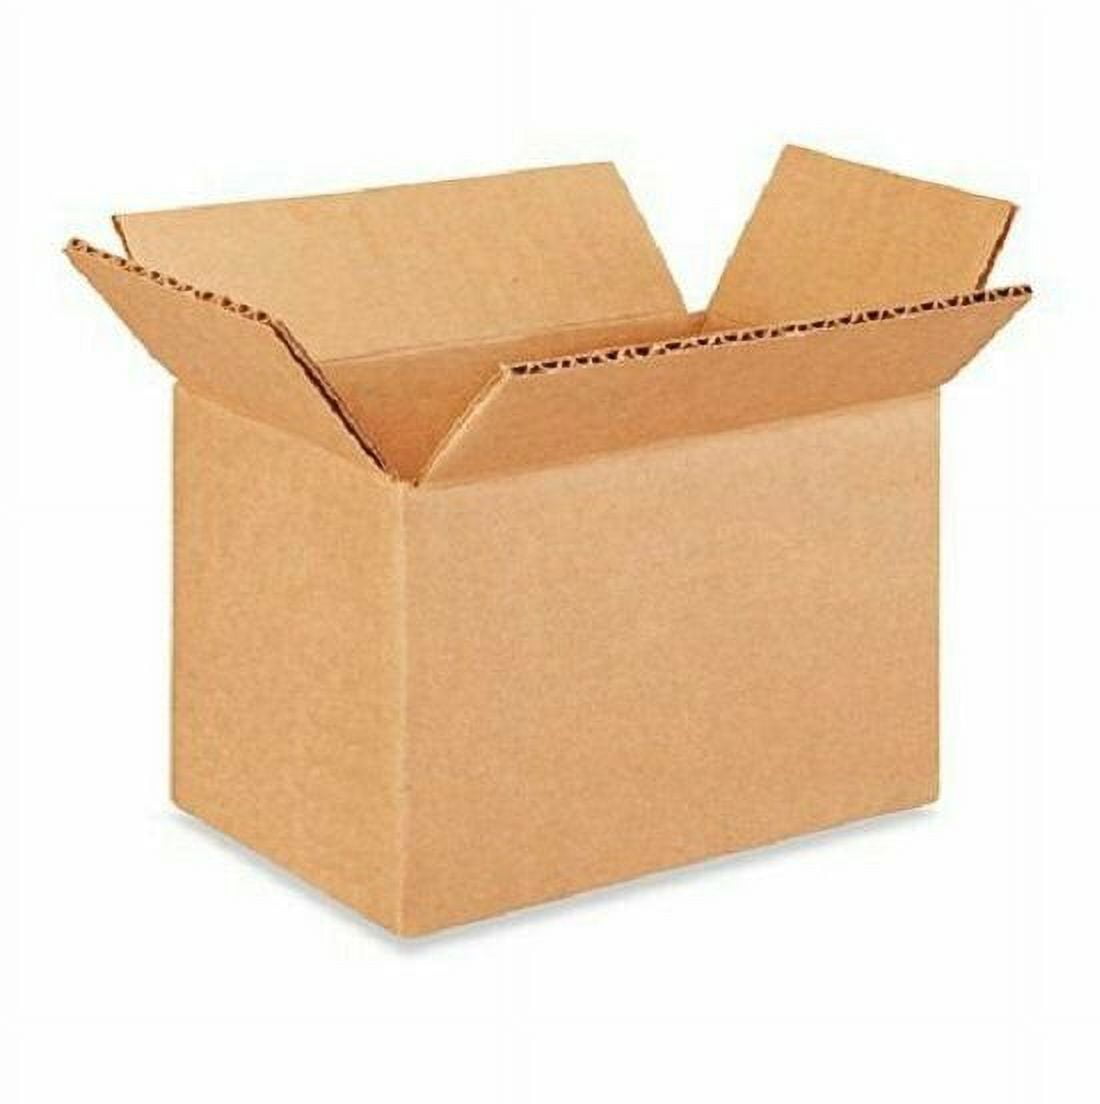 Frogued 5Pcs Carton Box Practical Portable Cardboard Transport Arrangement  Shipping Box for Mailing (A)